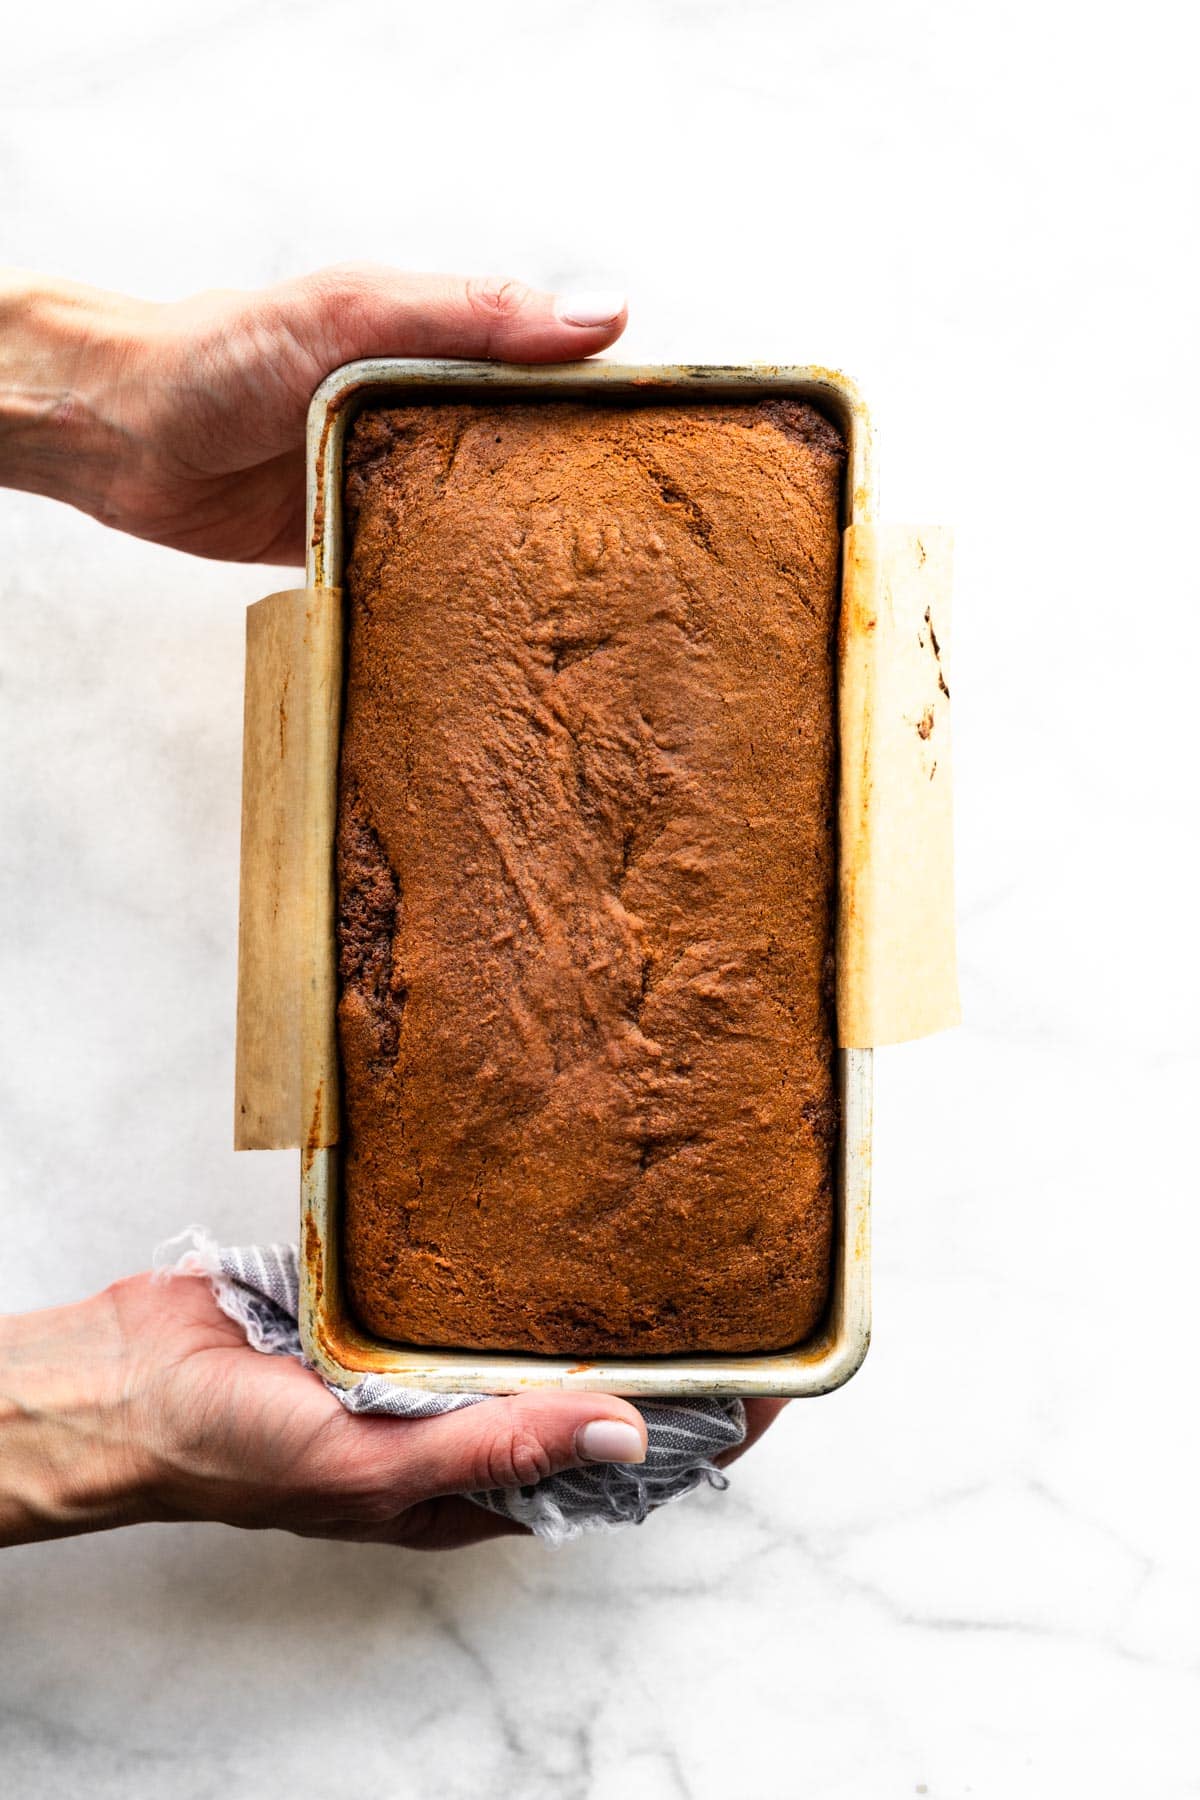 A woman's hands holding a loaf of gluten free gingerbread in a metal pan.